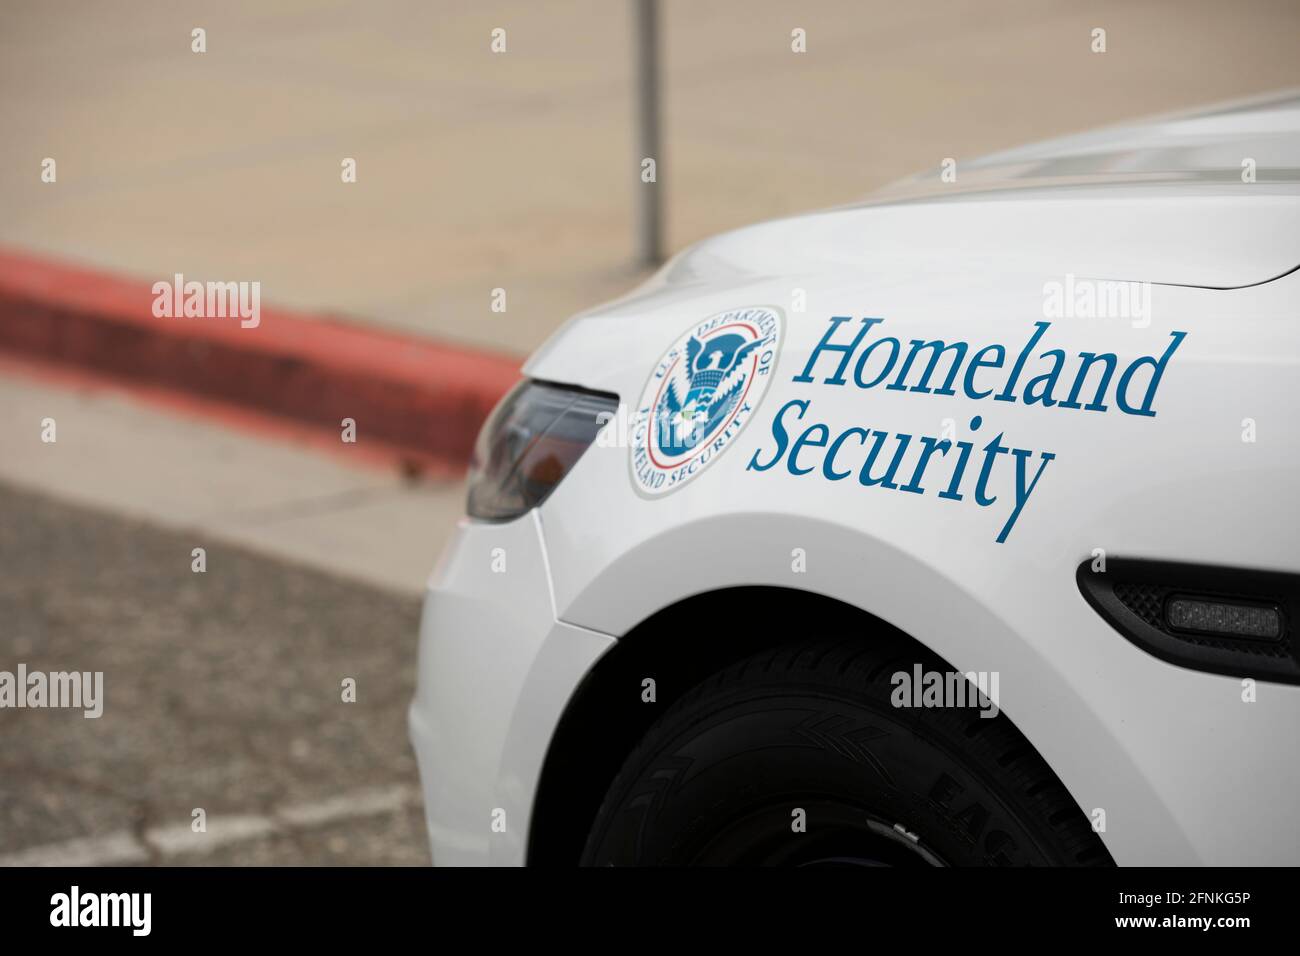 Los Angeles, California, USA - May 15, 2021: A Department of Homeland Security cruiser protects a Federal building. Stock Photo